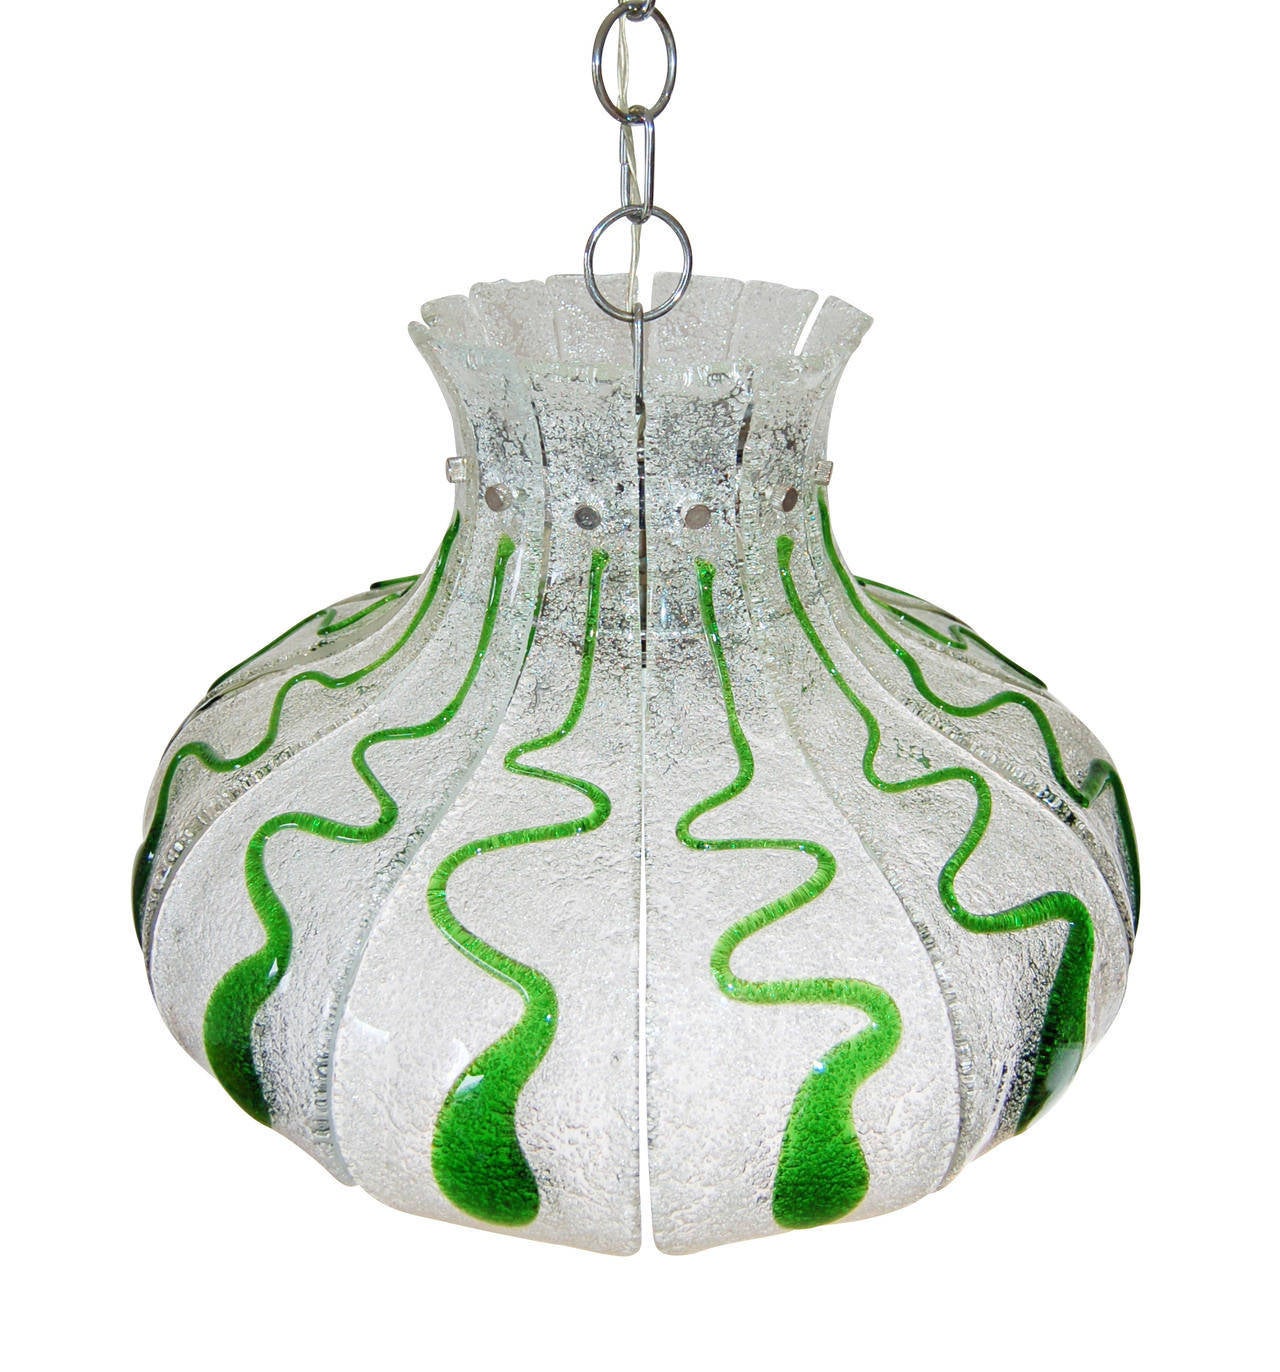 Carlo Nason Glass Lamp Pendant Chandelier, Green Glass, 1970  In Good Condition For Sale In Hausmannstätten, AT